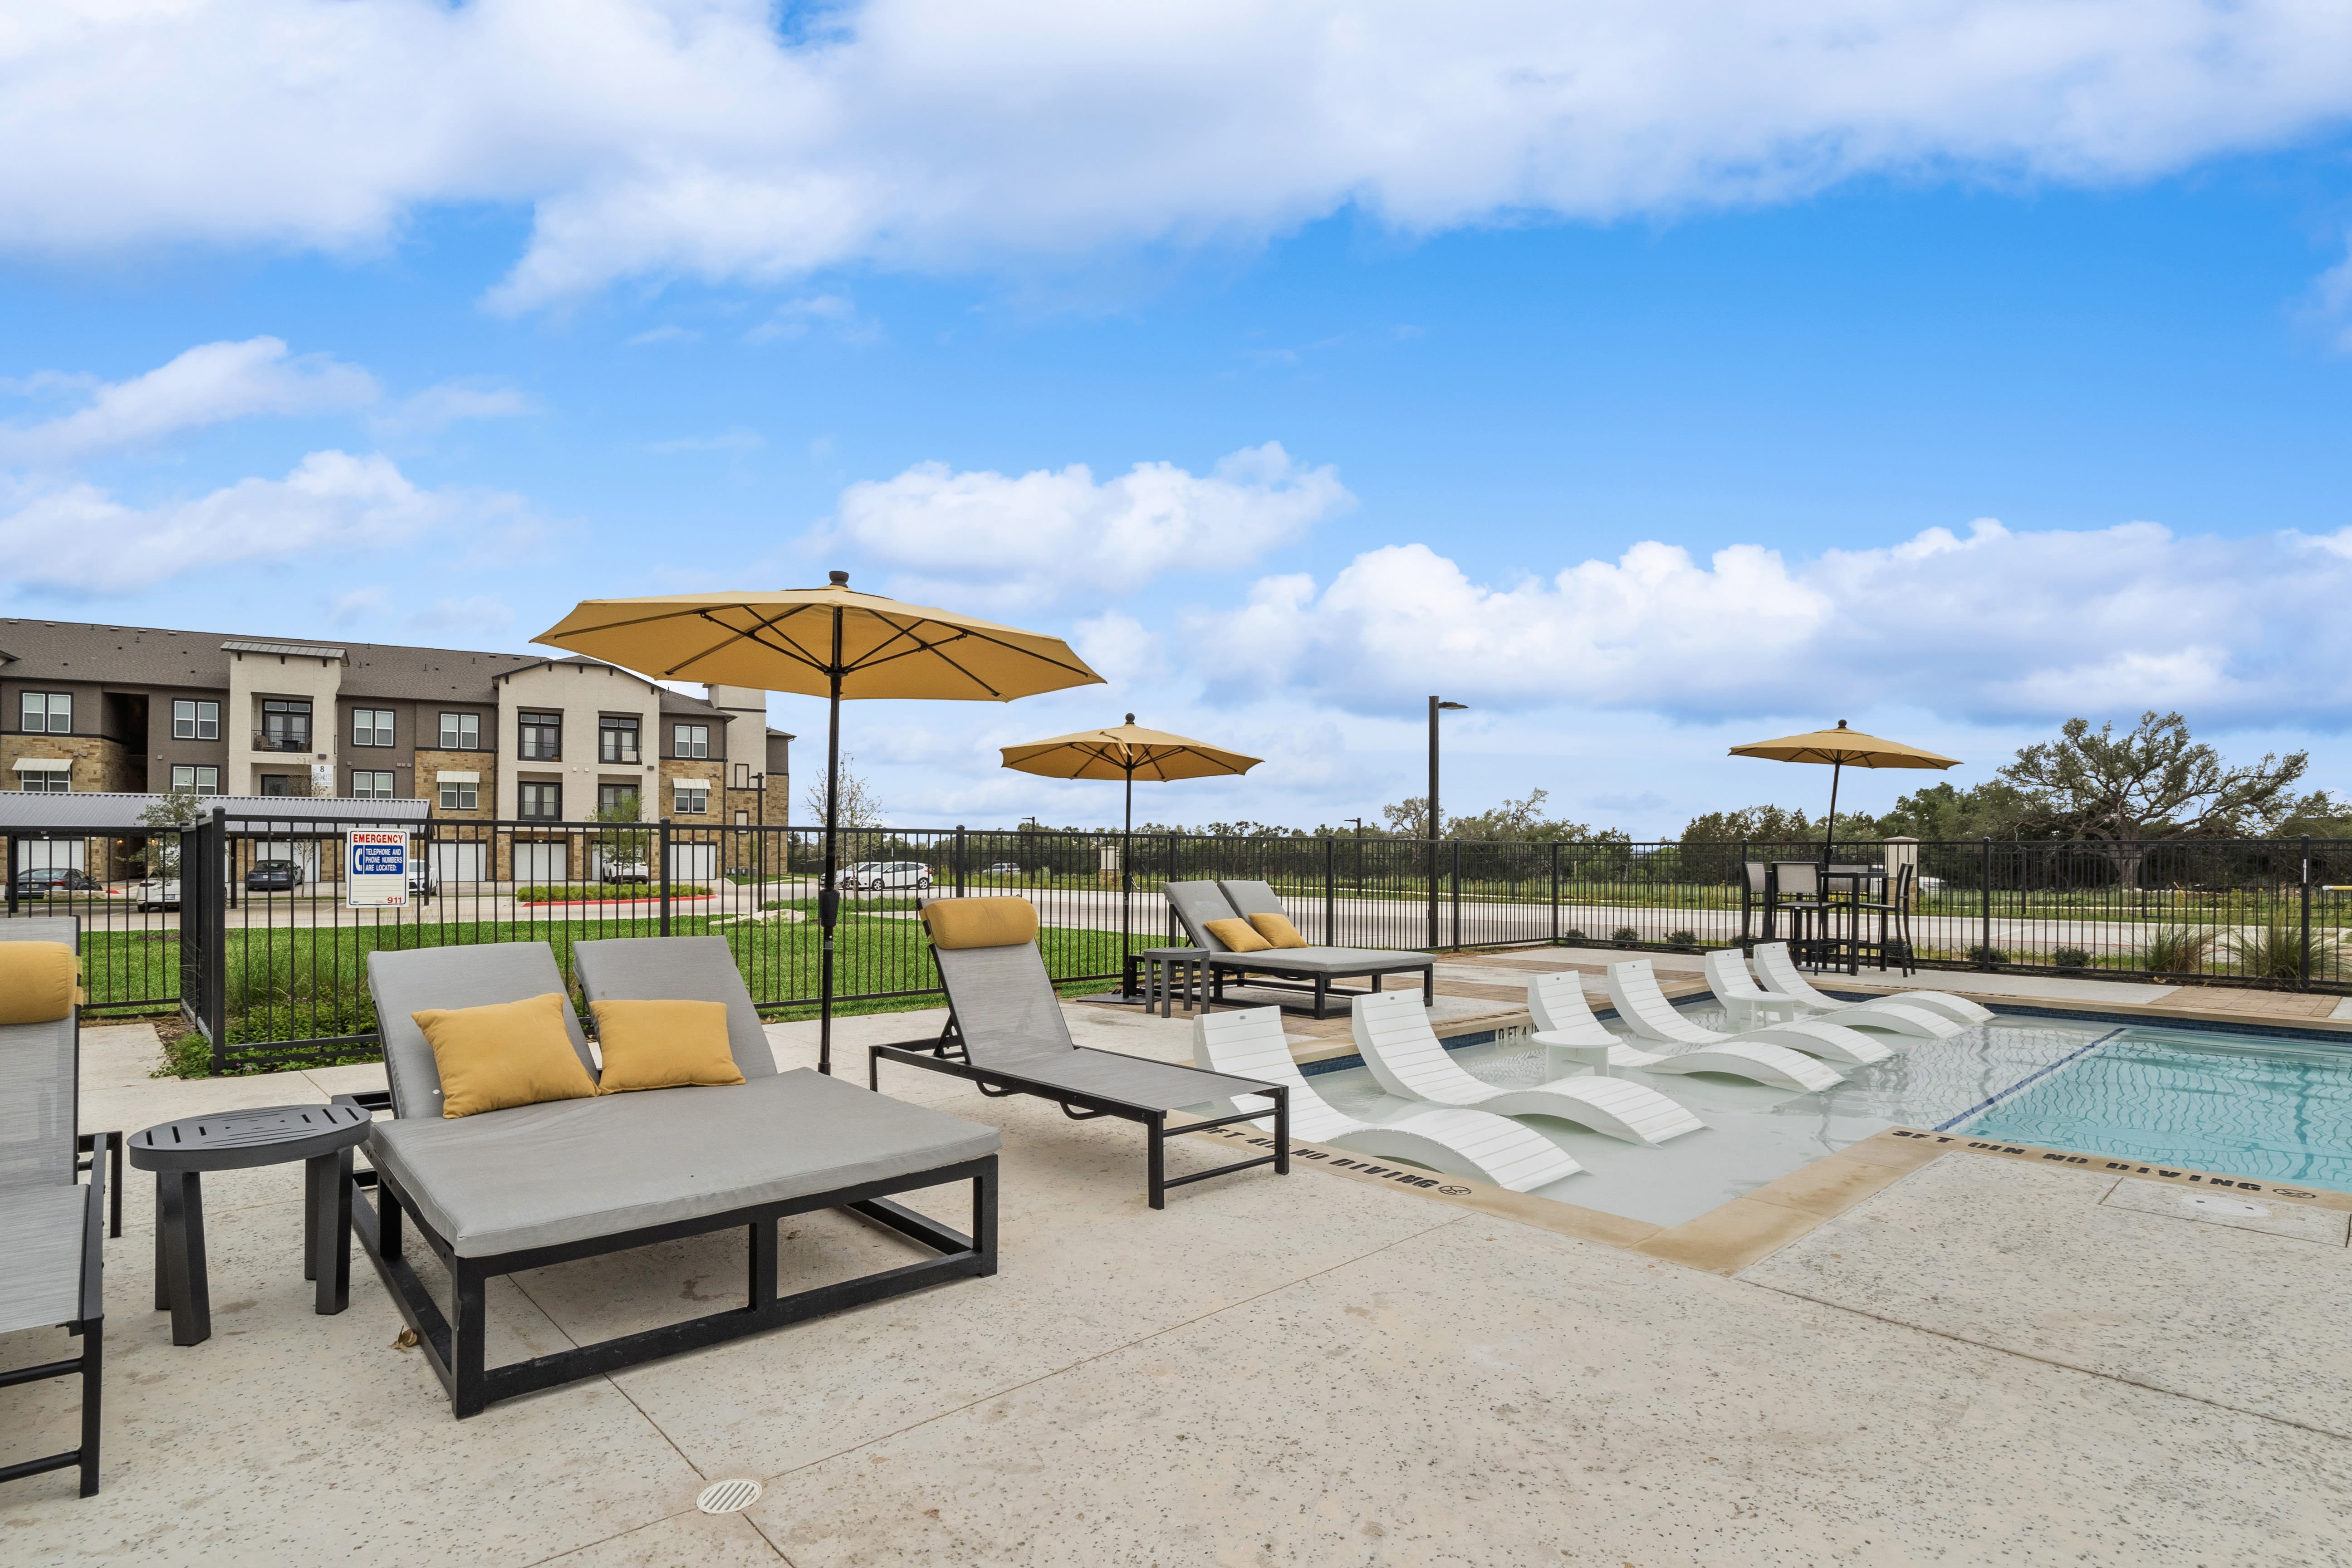 Lounge seating facing the community swimming pool at Radius Wolf Ranch in Georgetown, Texas